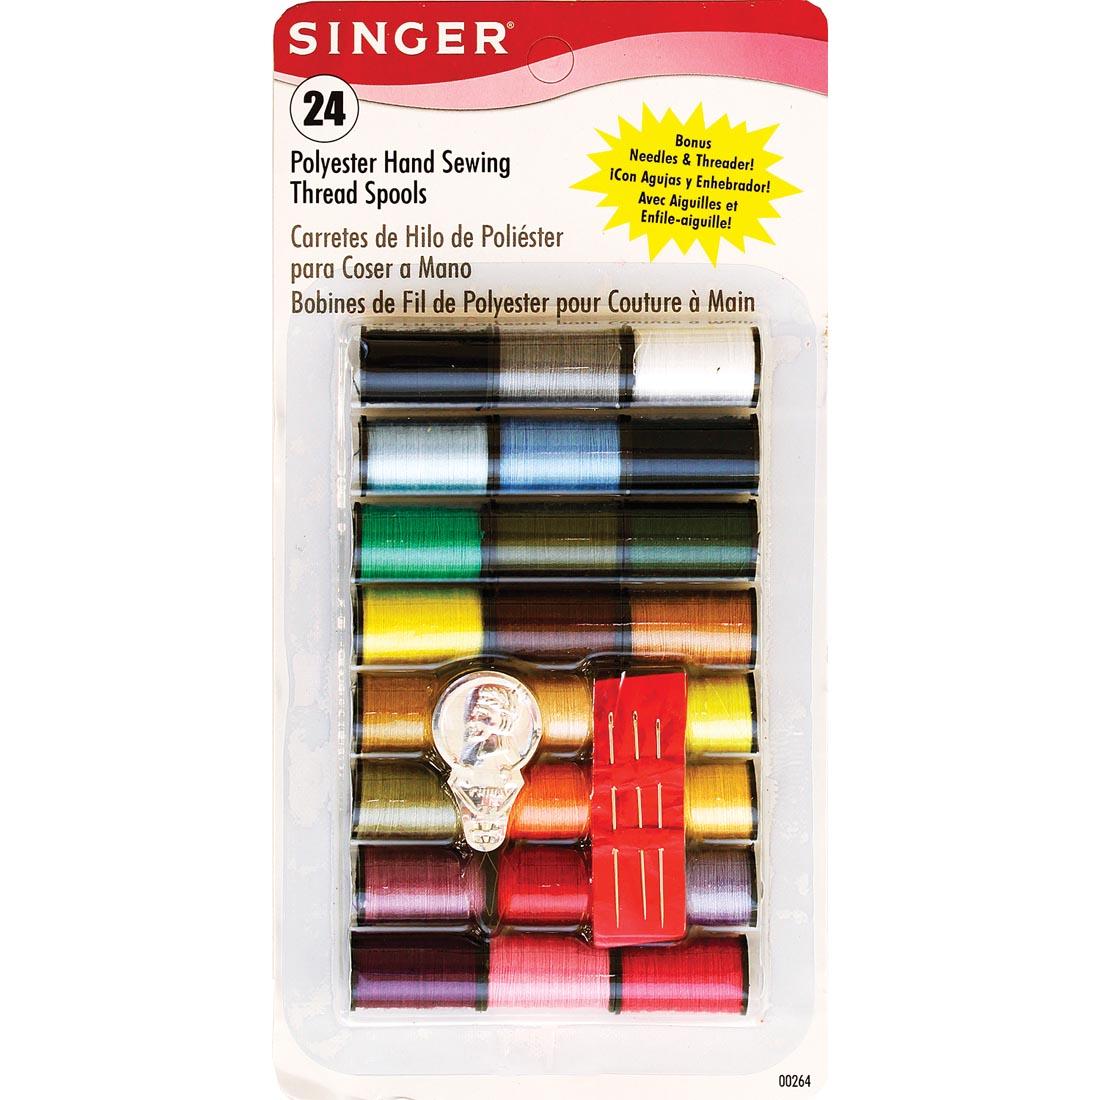 24 Spools of Singer Hand Sewing Thread, 3 Needles and a Needle Threader